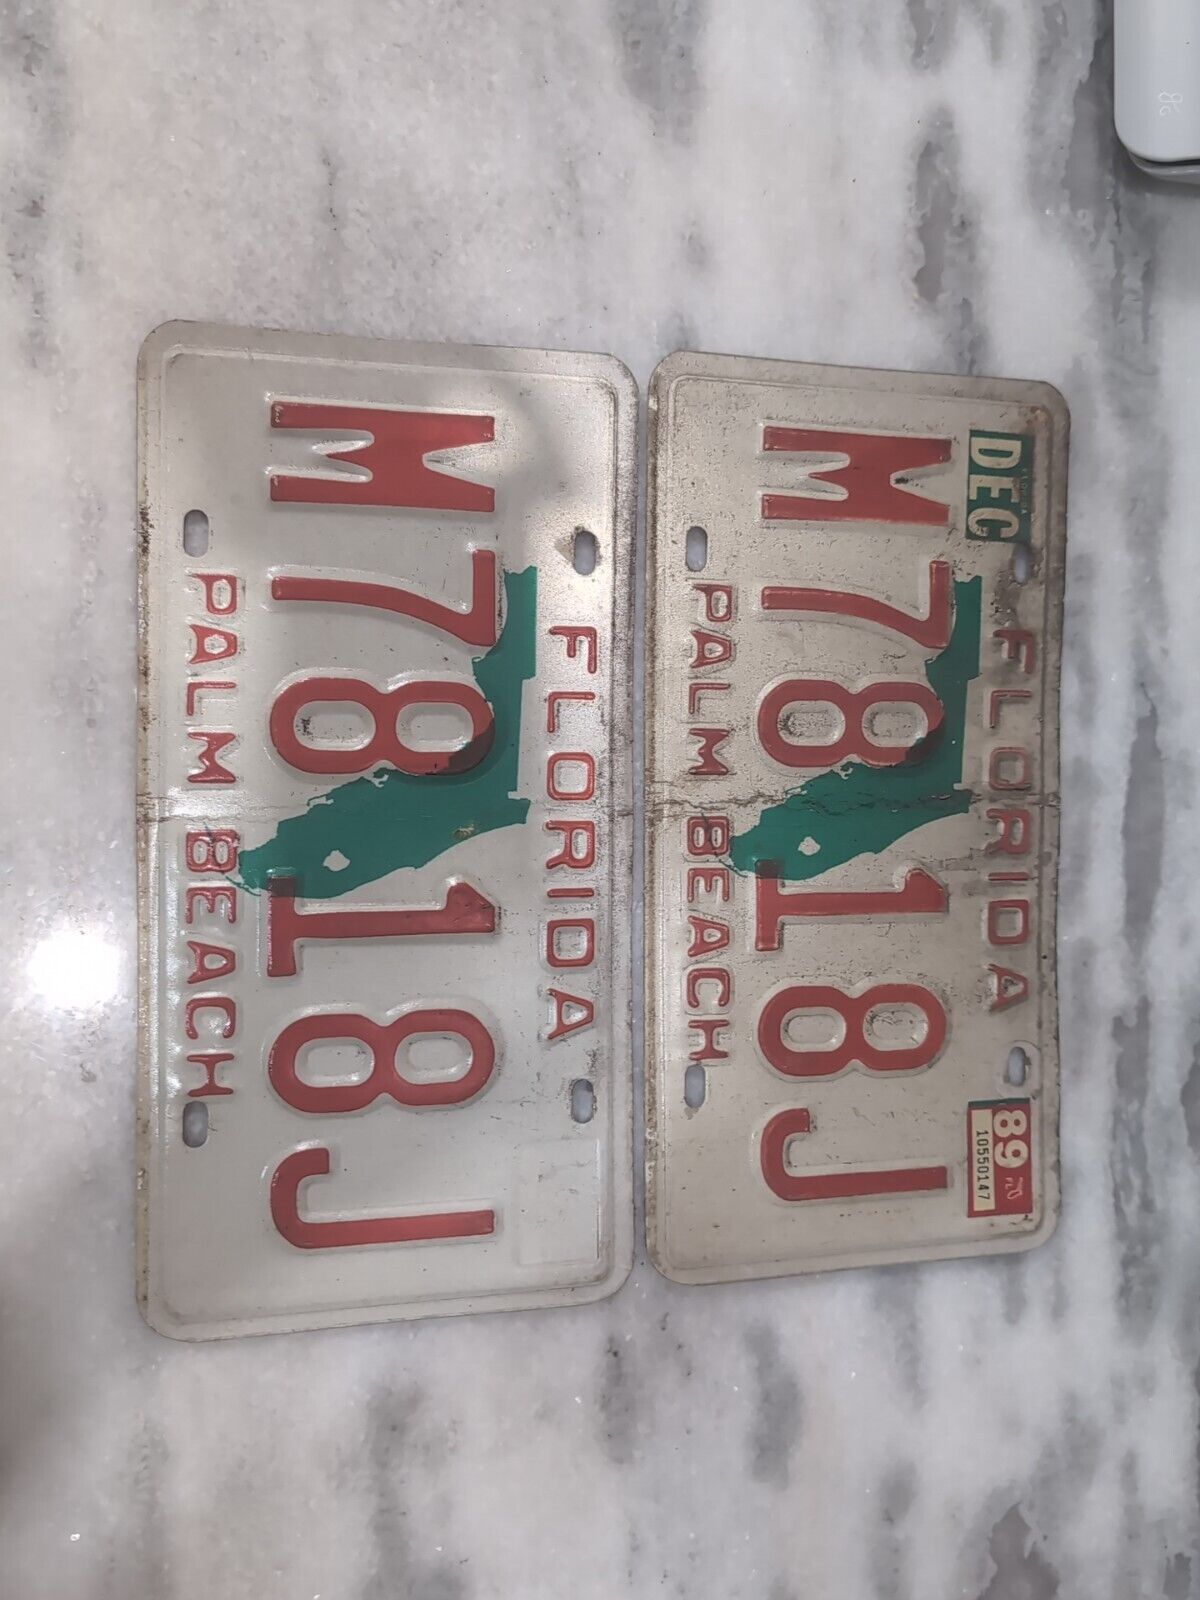 Two Matching Vintage 1989 Florida Palm Beach County License Plate M78 18J Expire